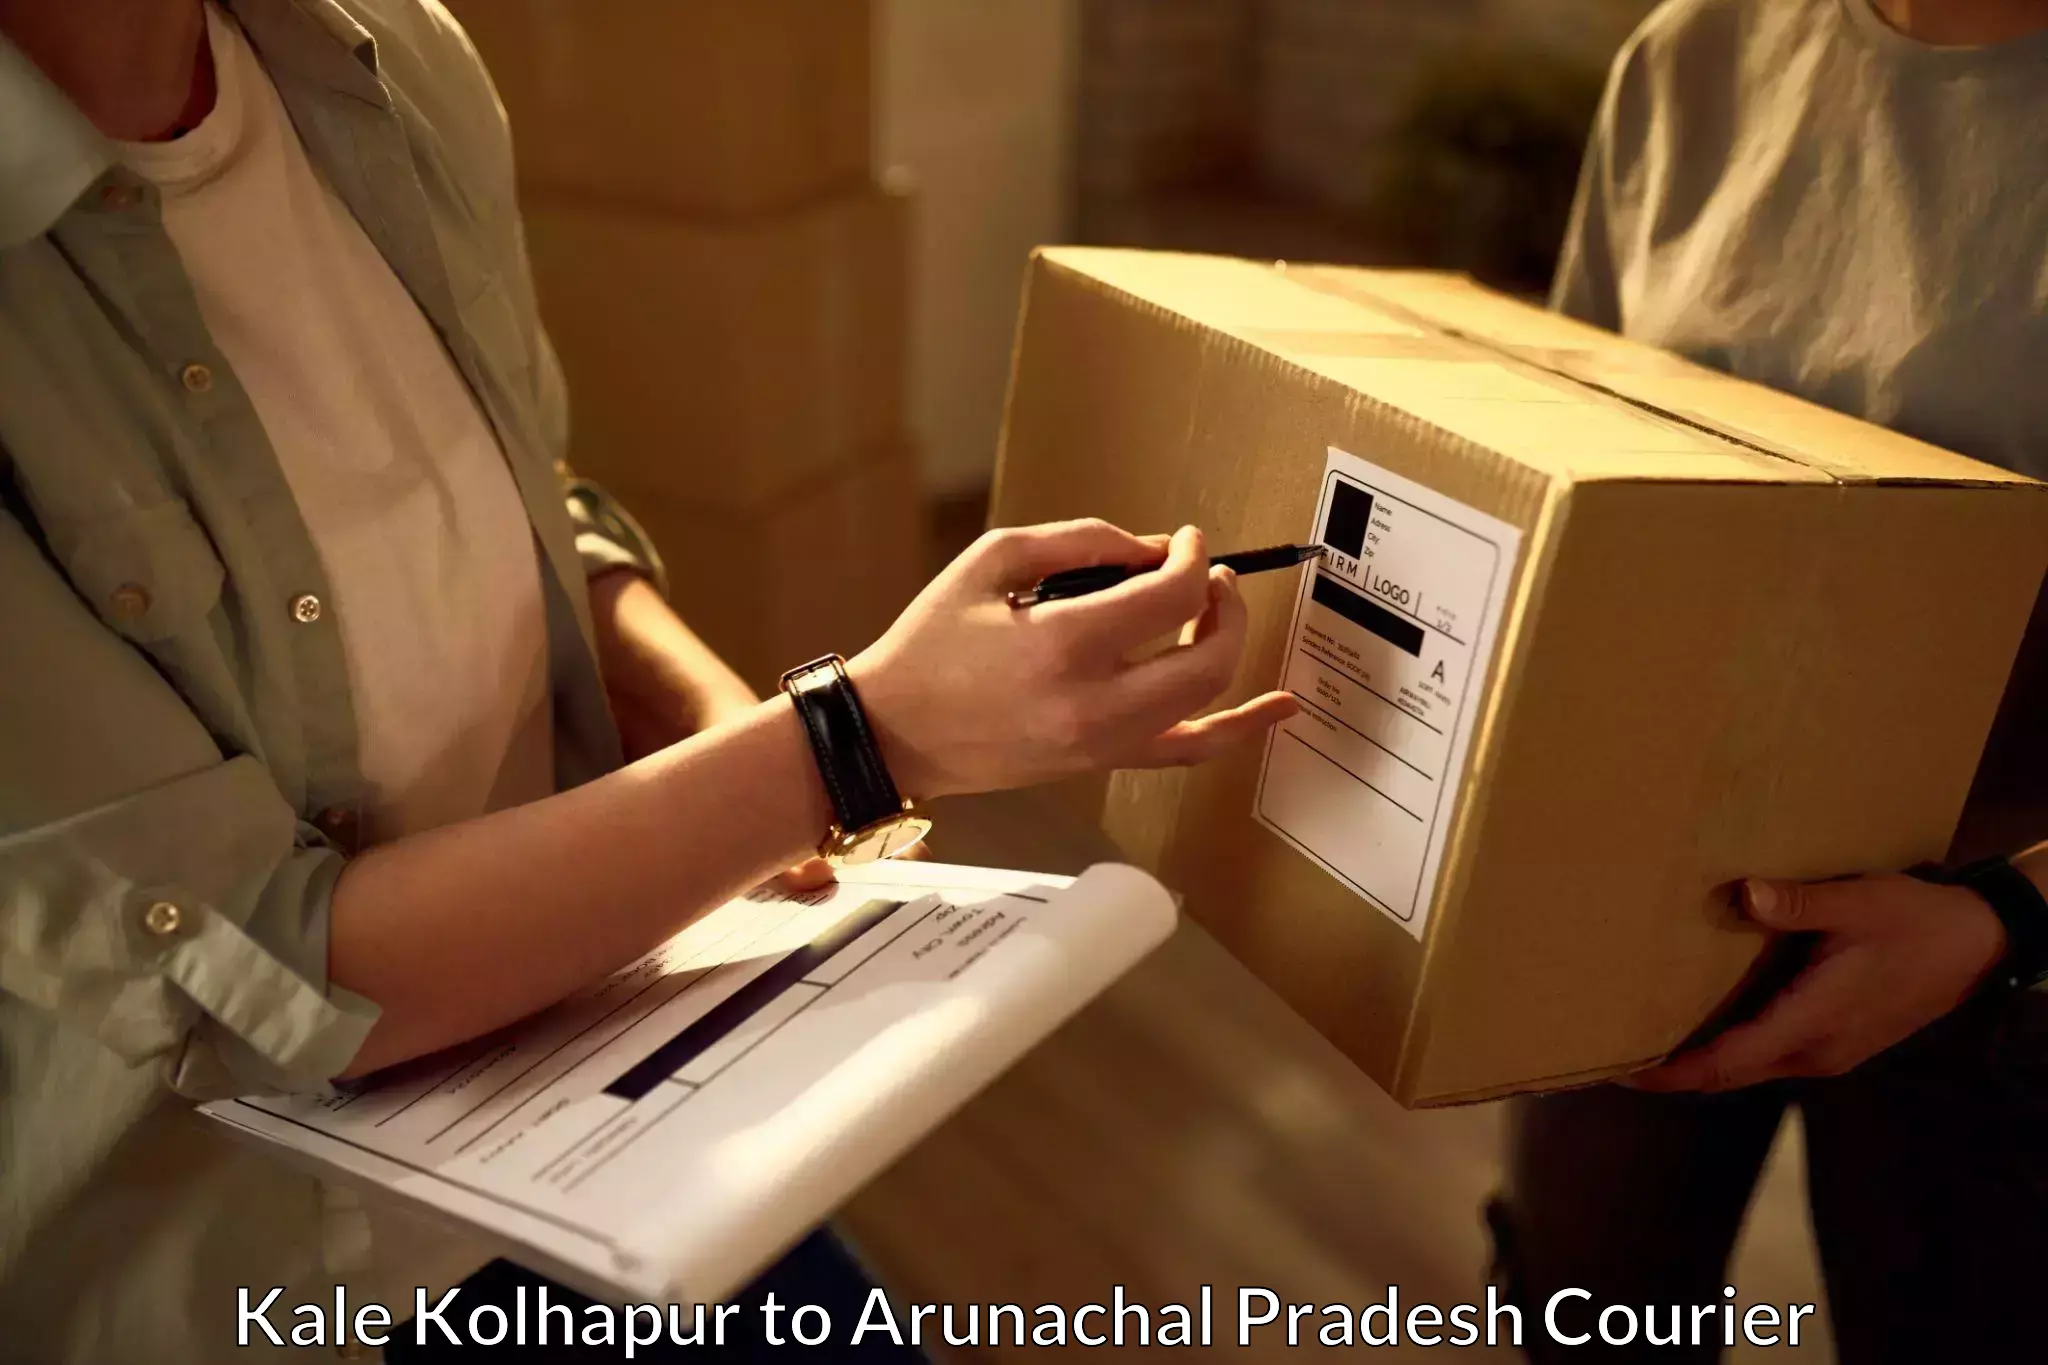 State-of-the-art courier technology Kale Kolhapur to Dibang Valley